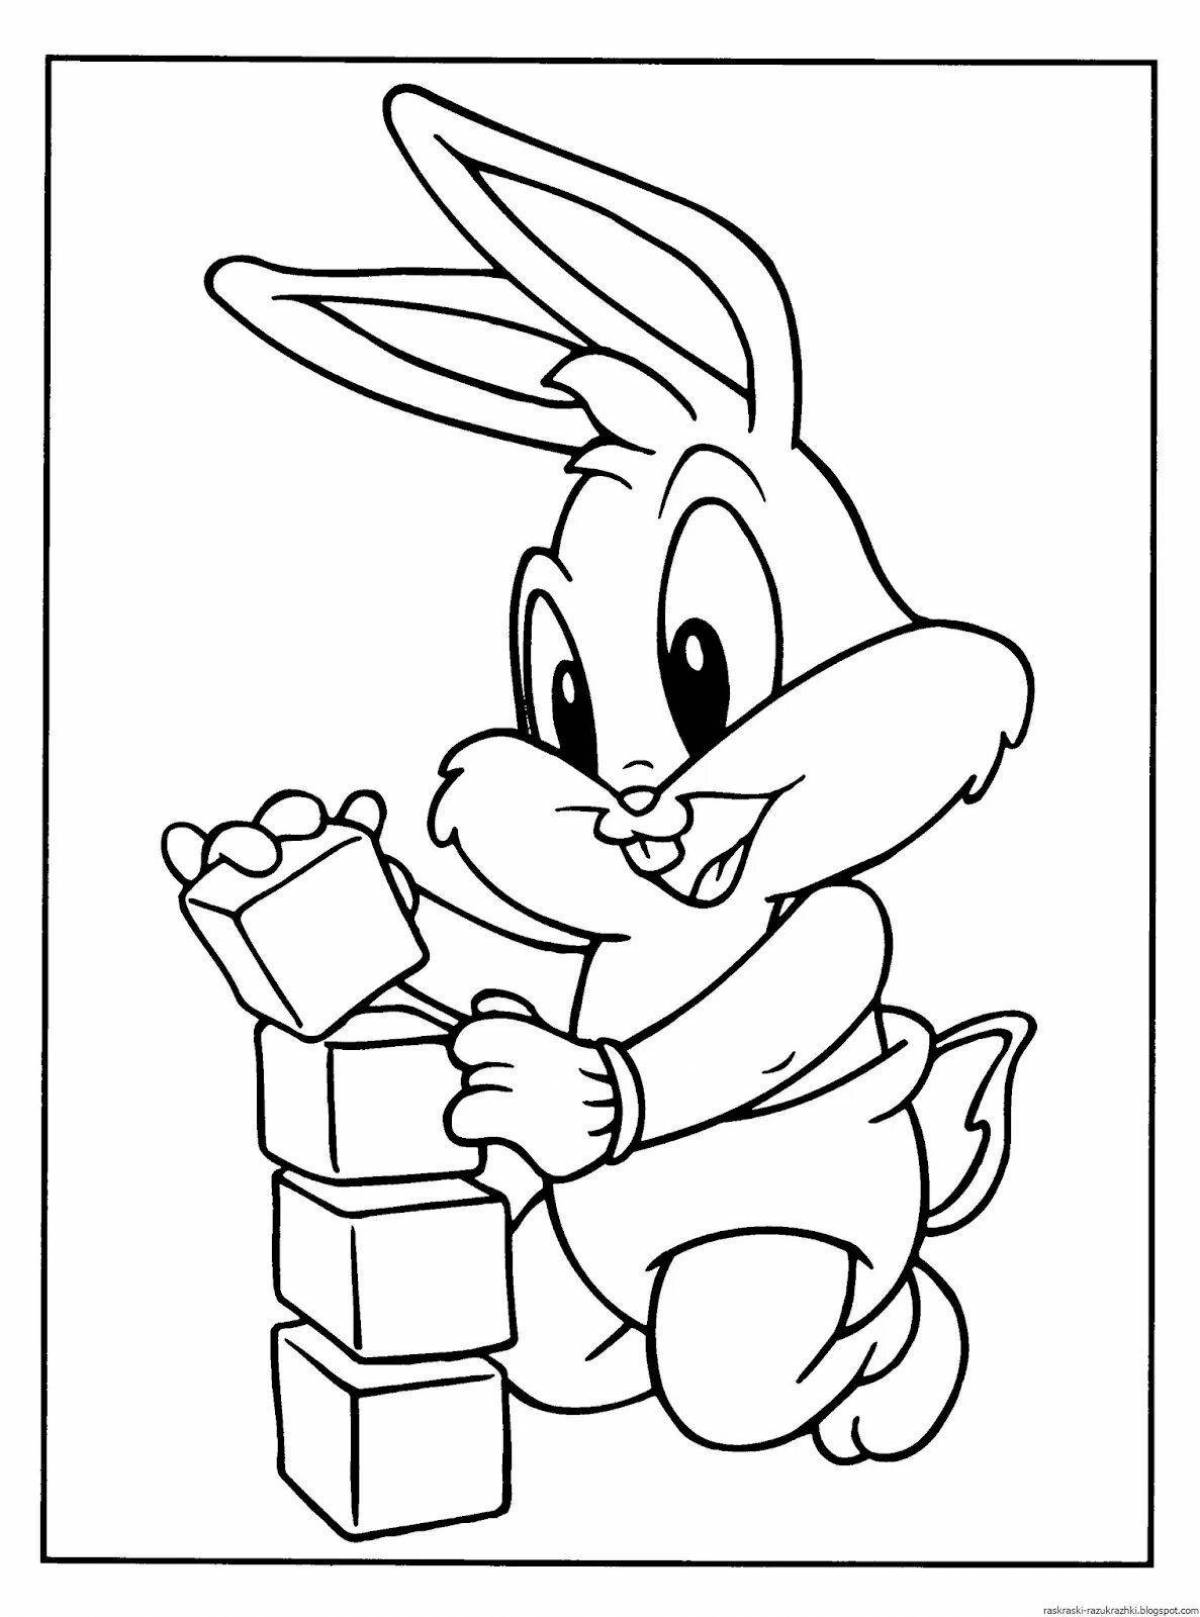 Colorful cartoon hare coloring book